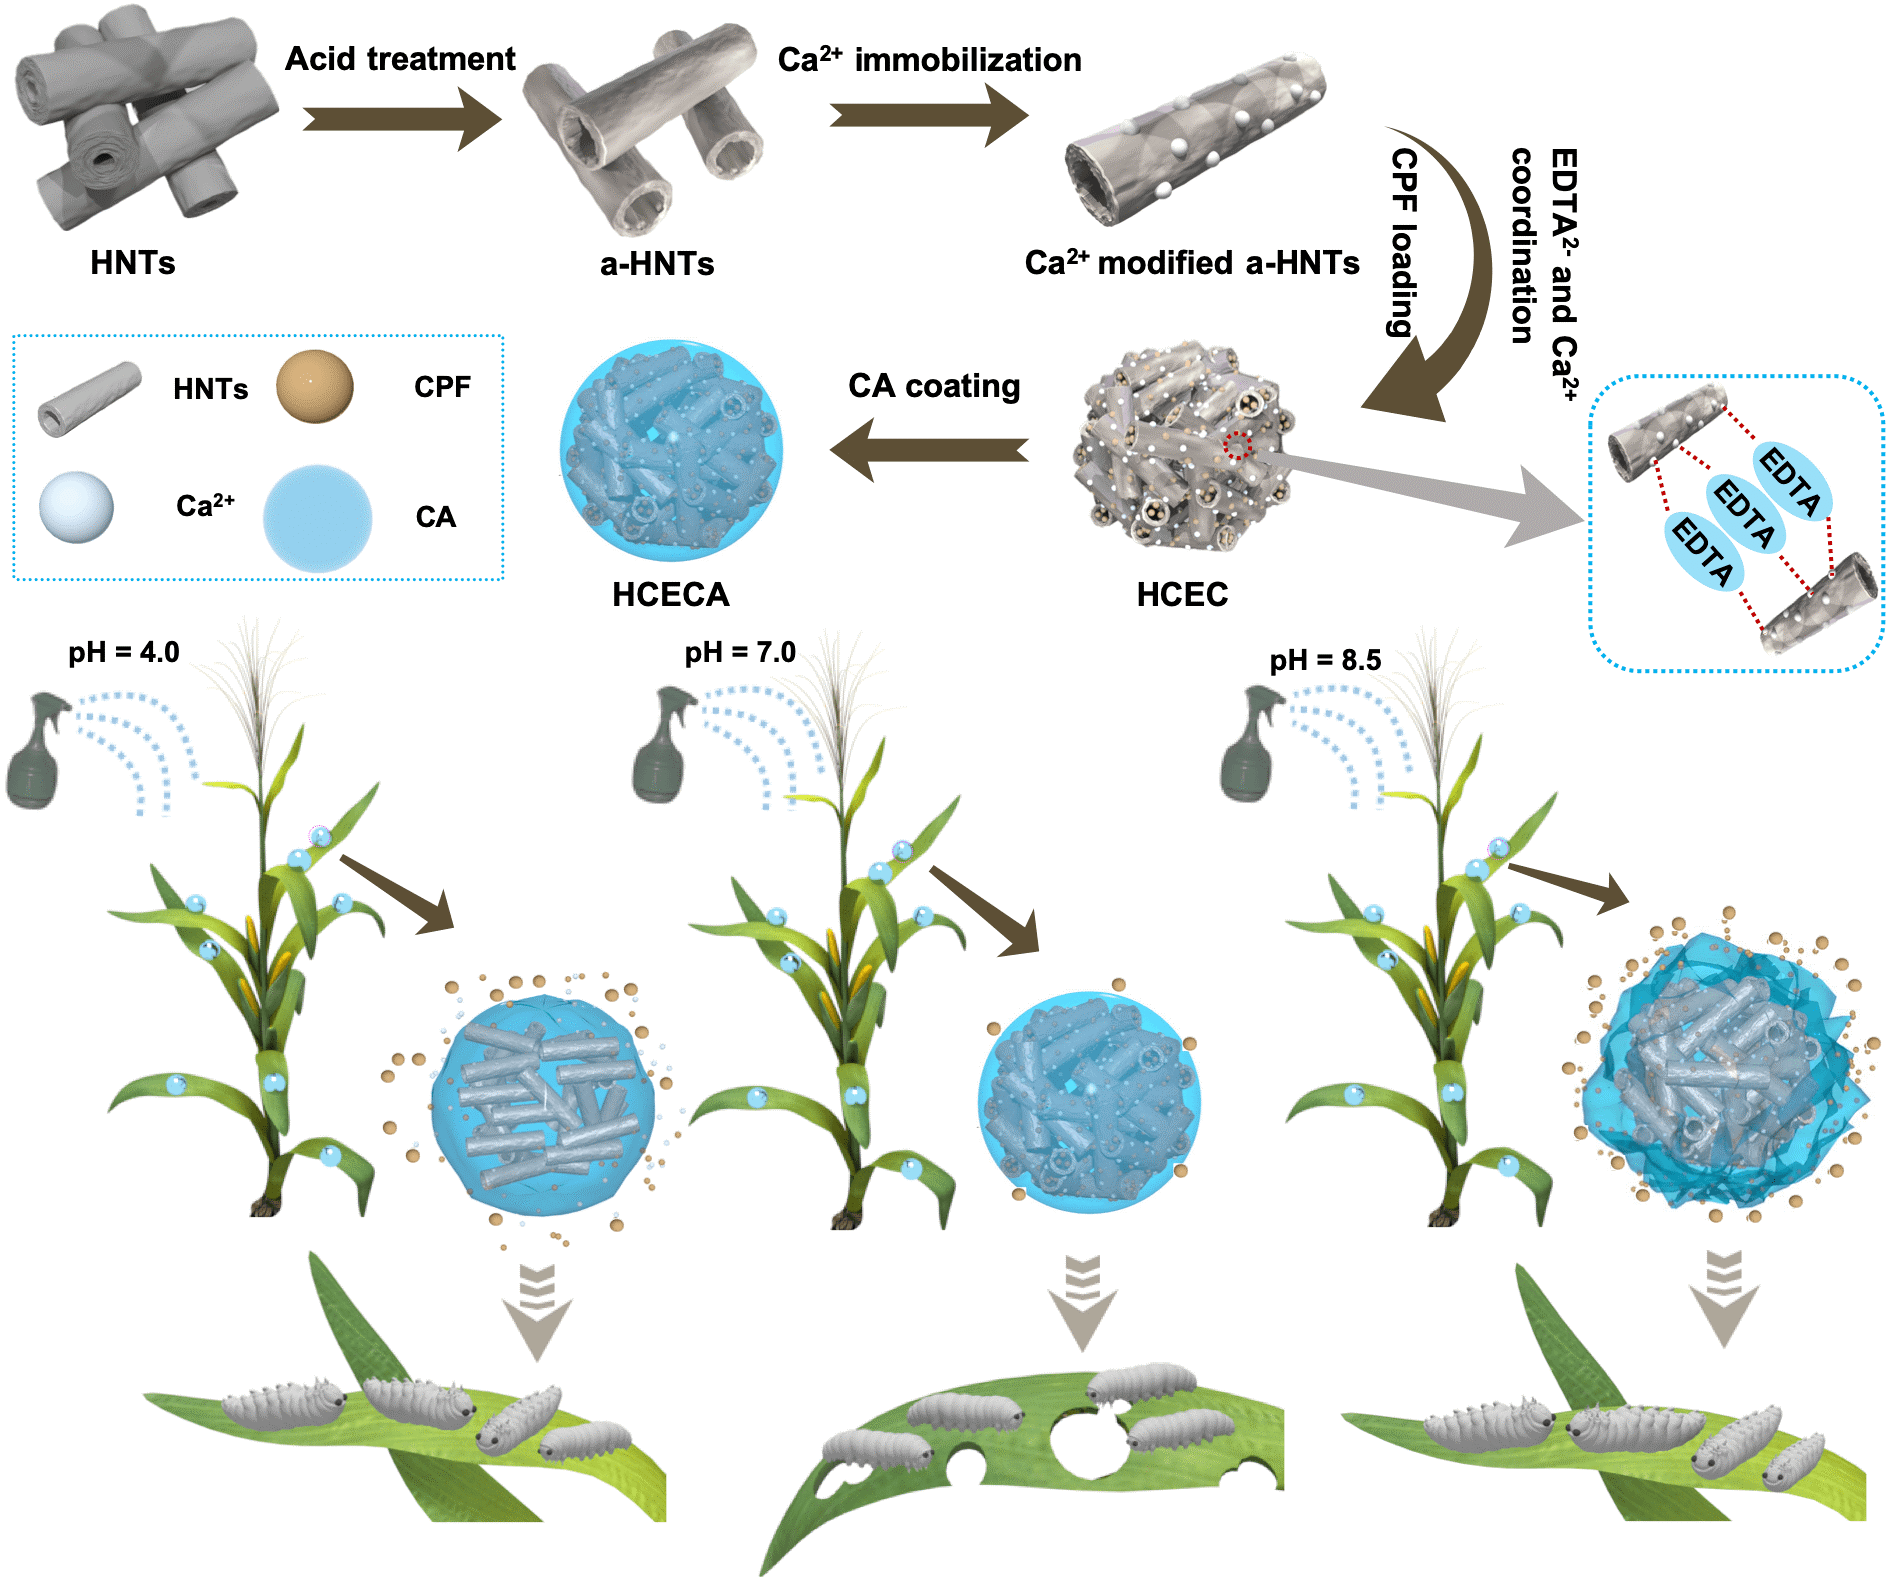 Schematic illustration of fabrication and mechanism of HCECA.